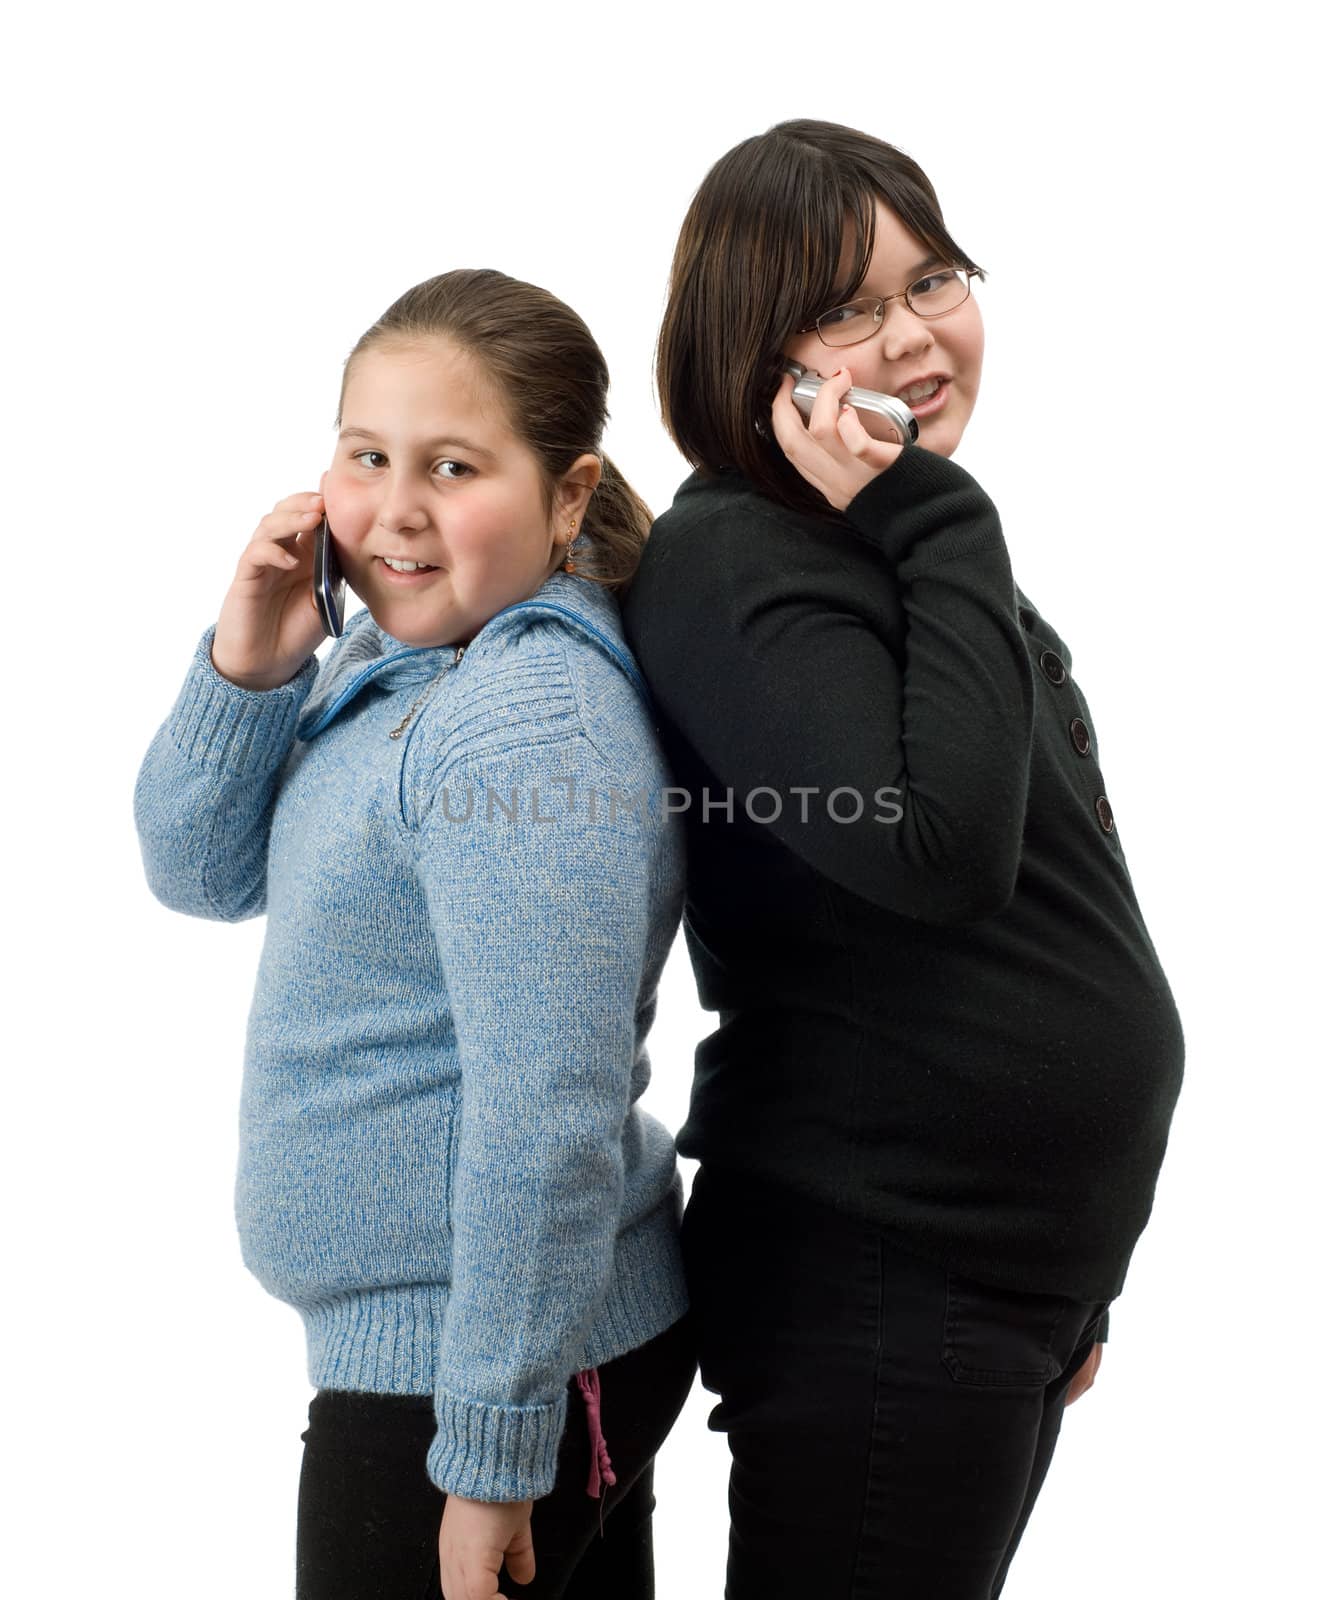 Two young girls standing back to back, talking on their cell phones, isolated against a white background